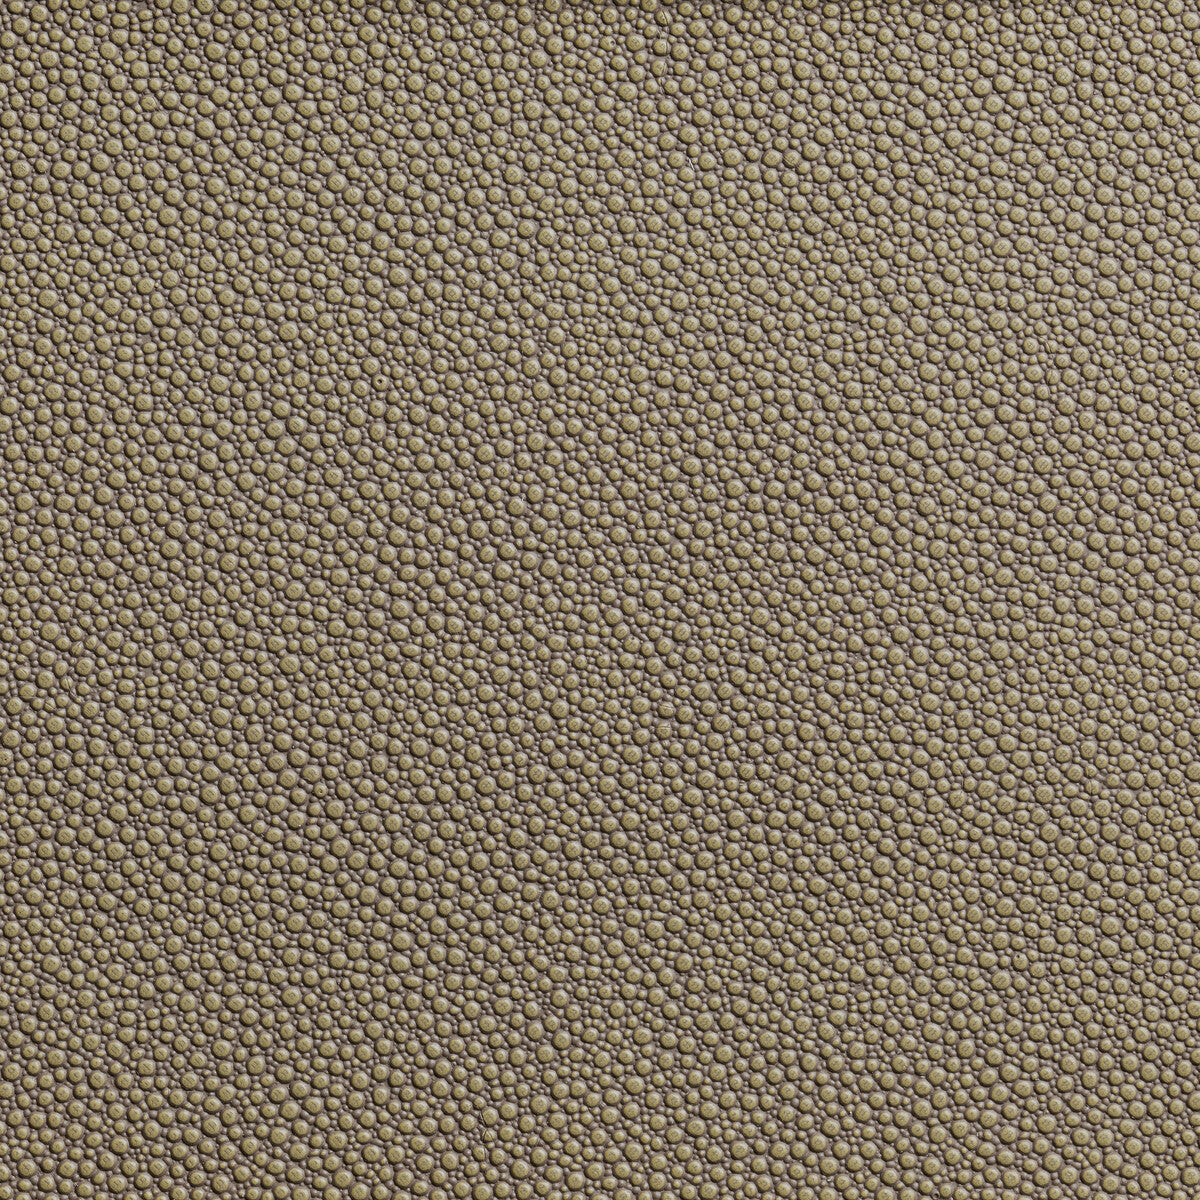 Fetch fabric in hemp color - pattern FETCH.106.0 - by Kravet Contract in the Foundations / Value collection